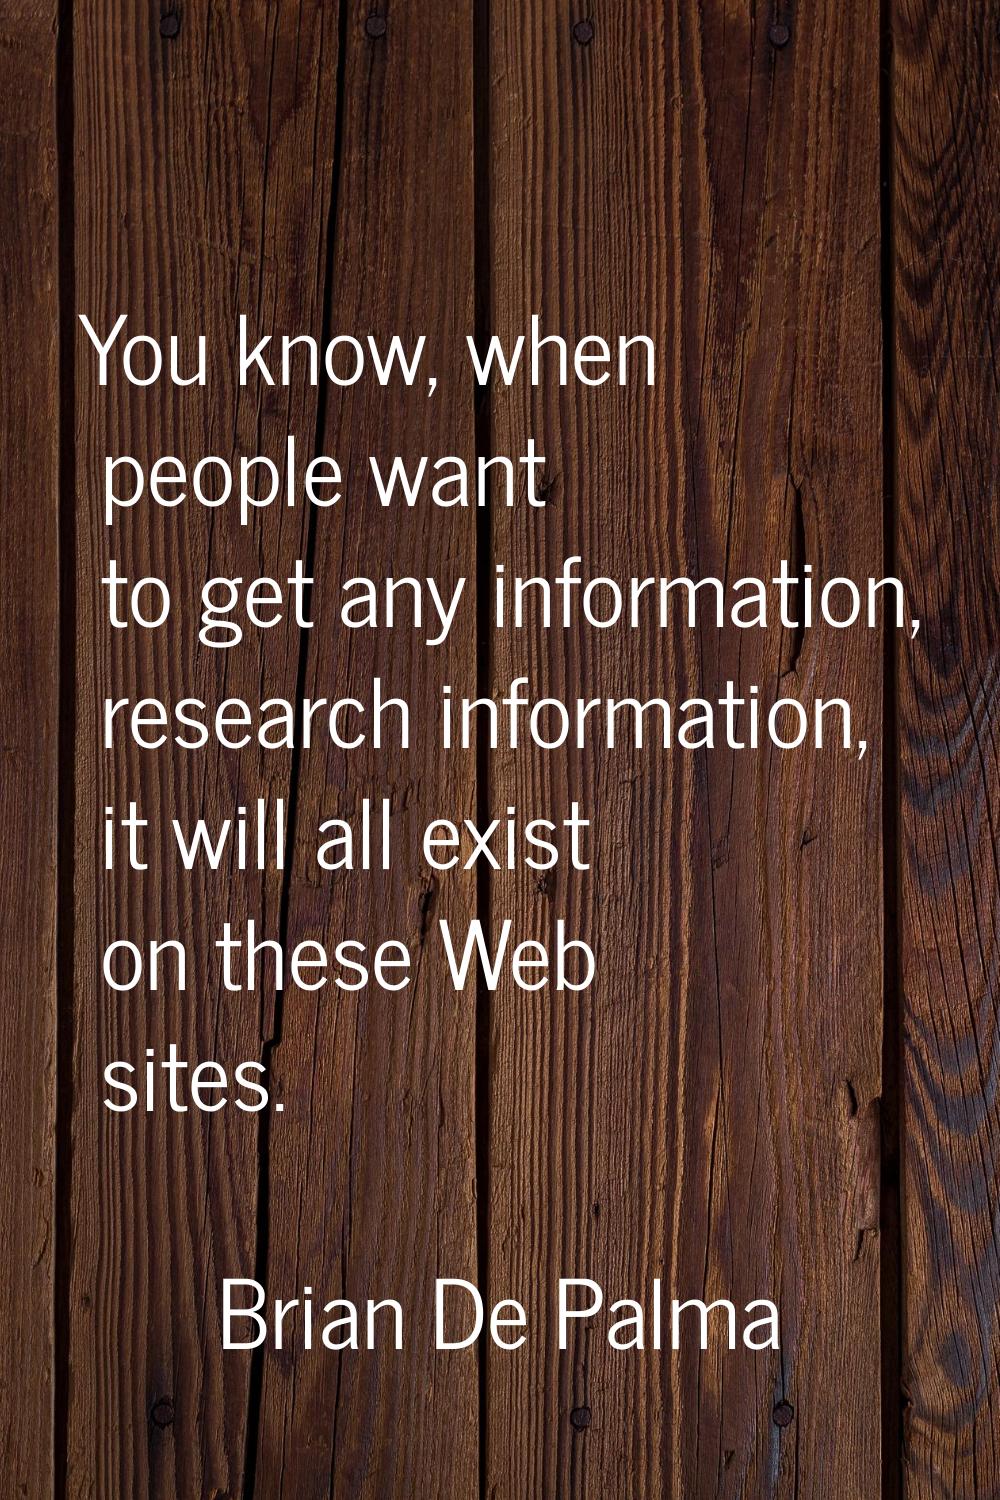 You know, when people want to get any information, research information, it will all exist on these